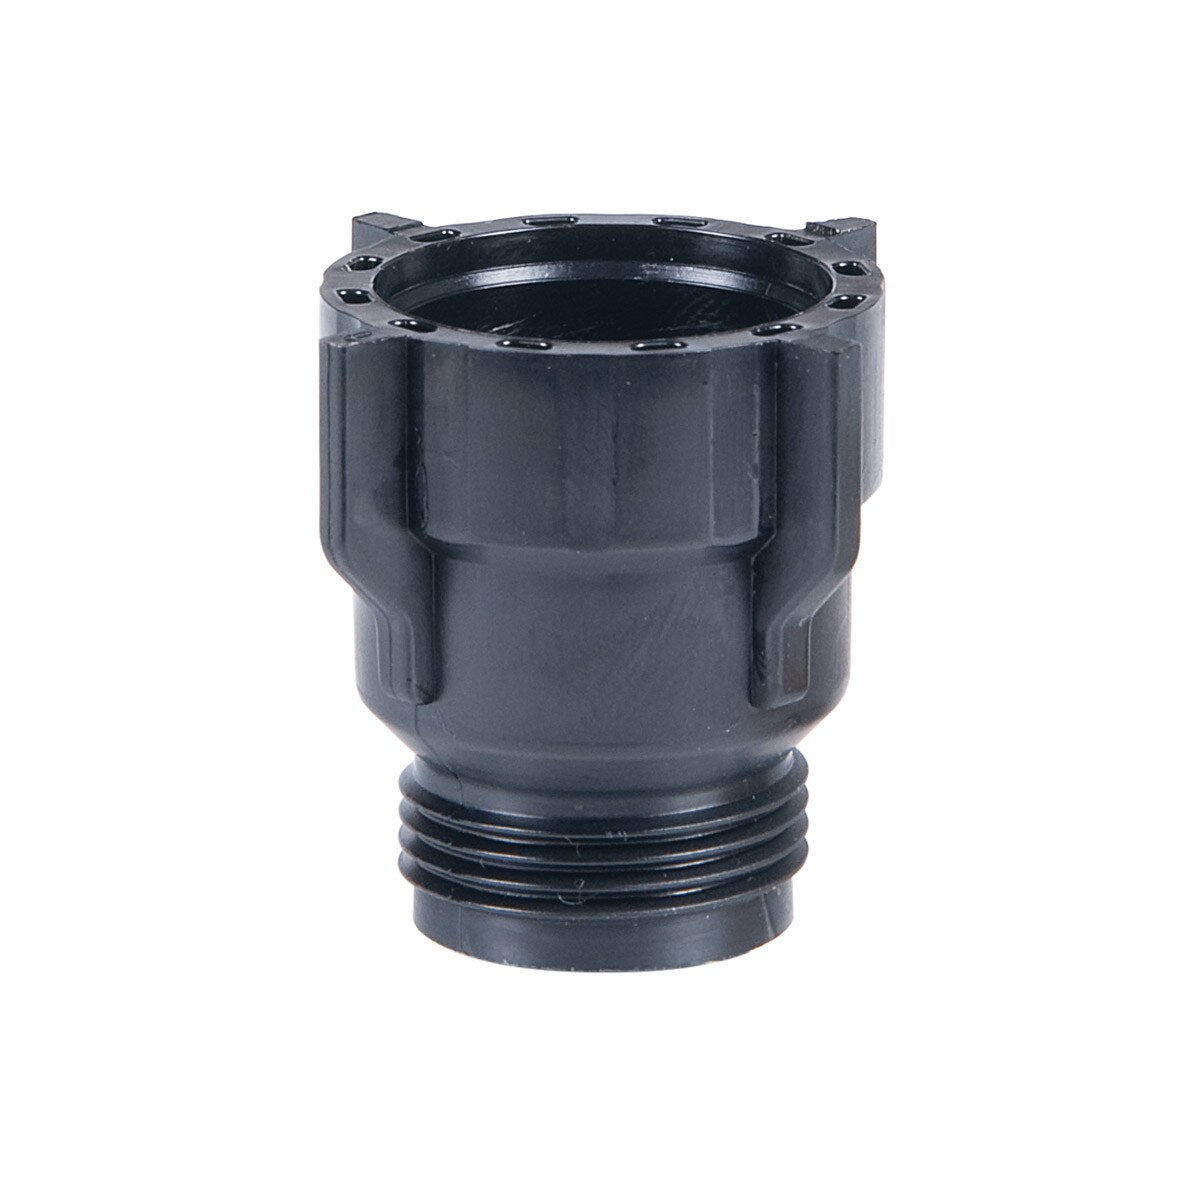 DIG - Valve Adapter for use w/ S-305DC Solenoids - 30-920